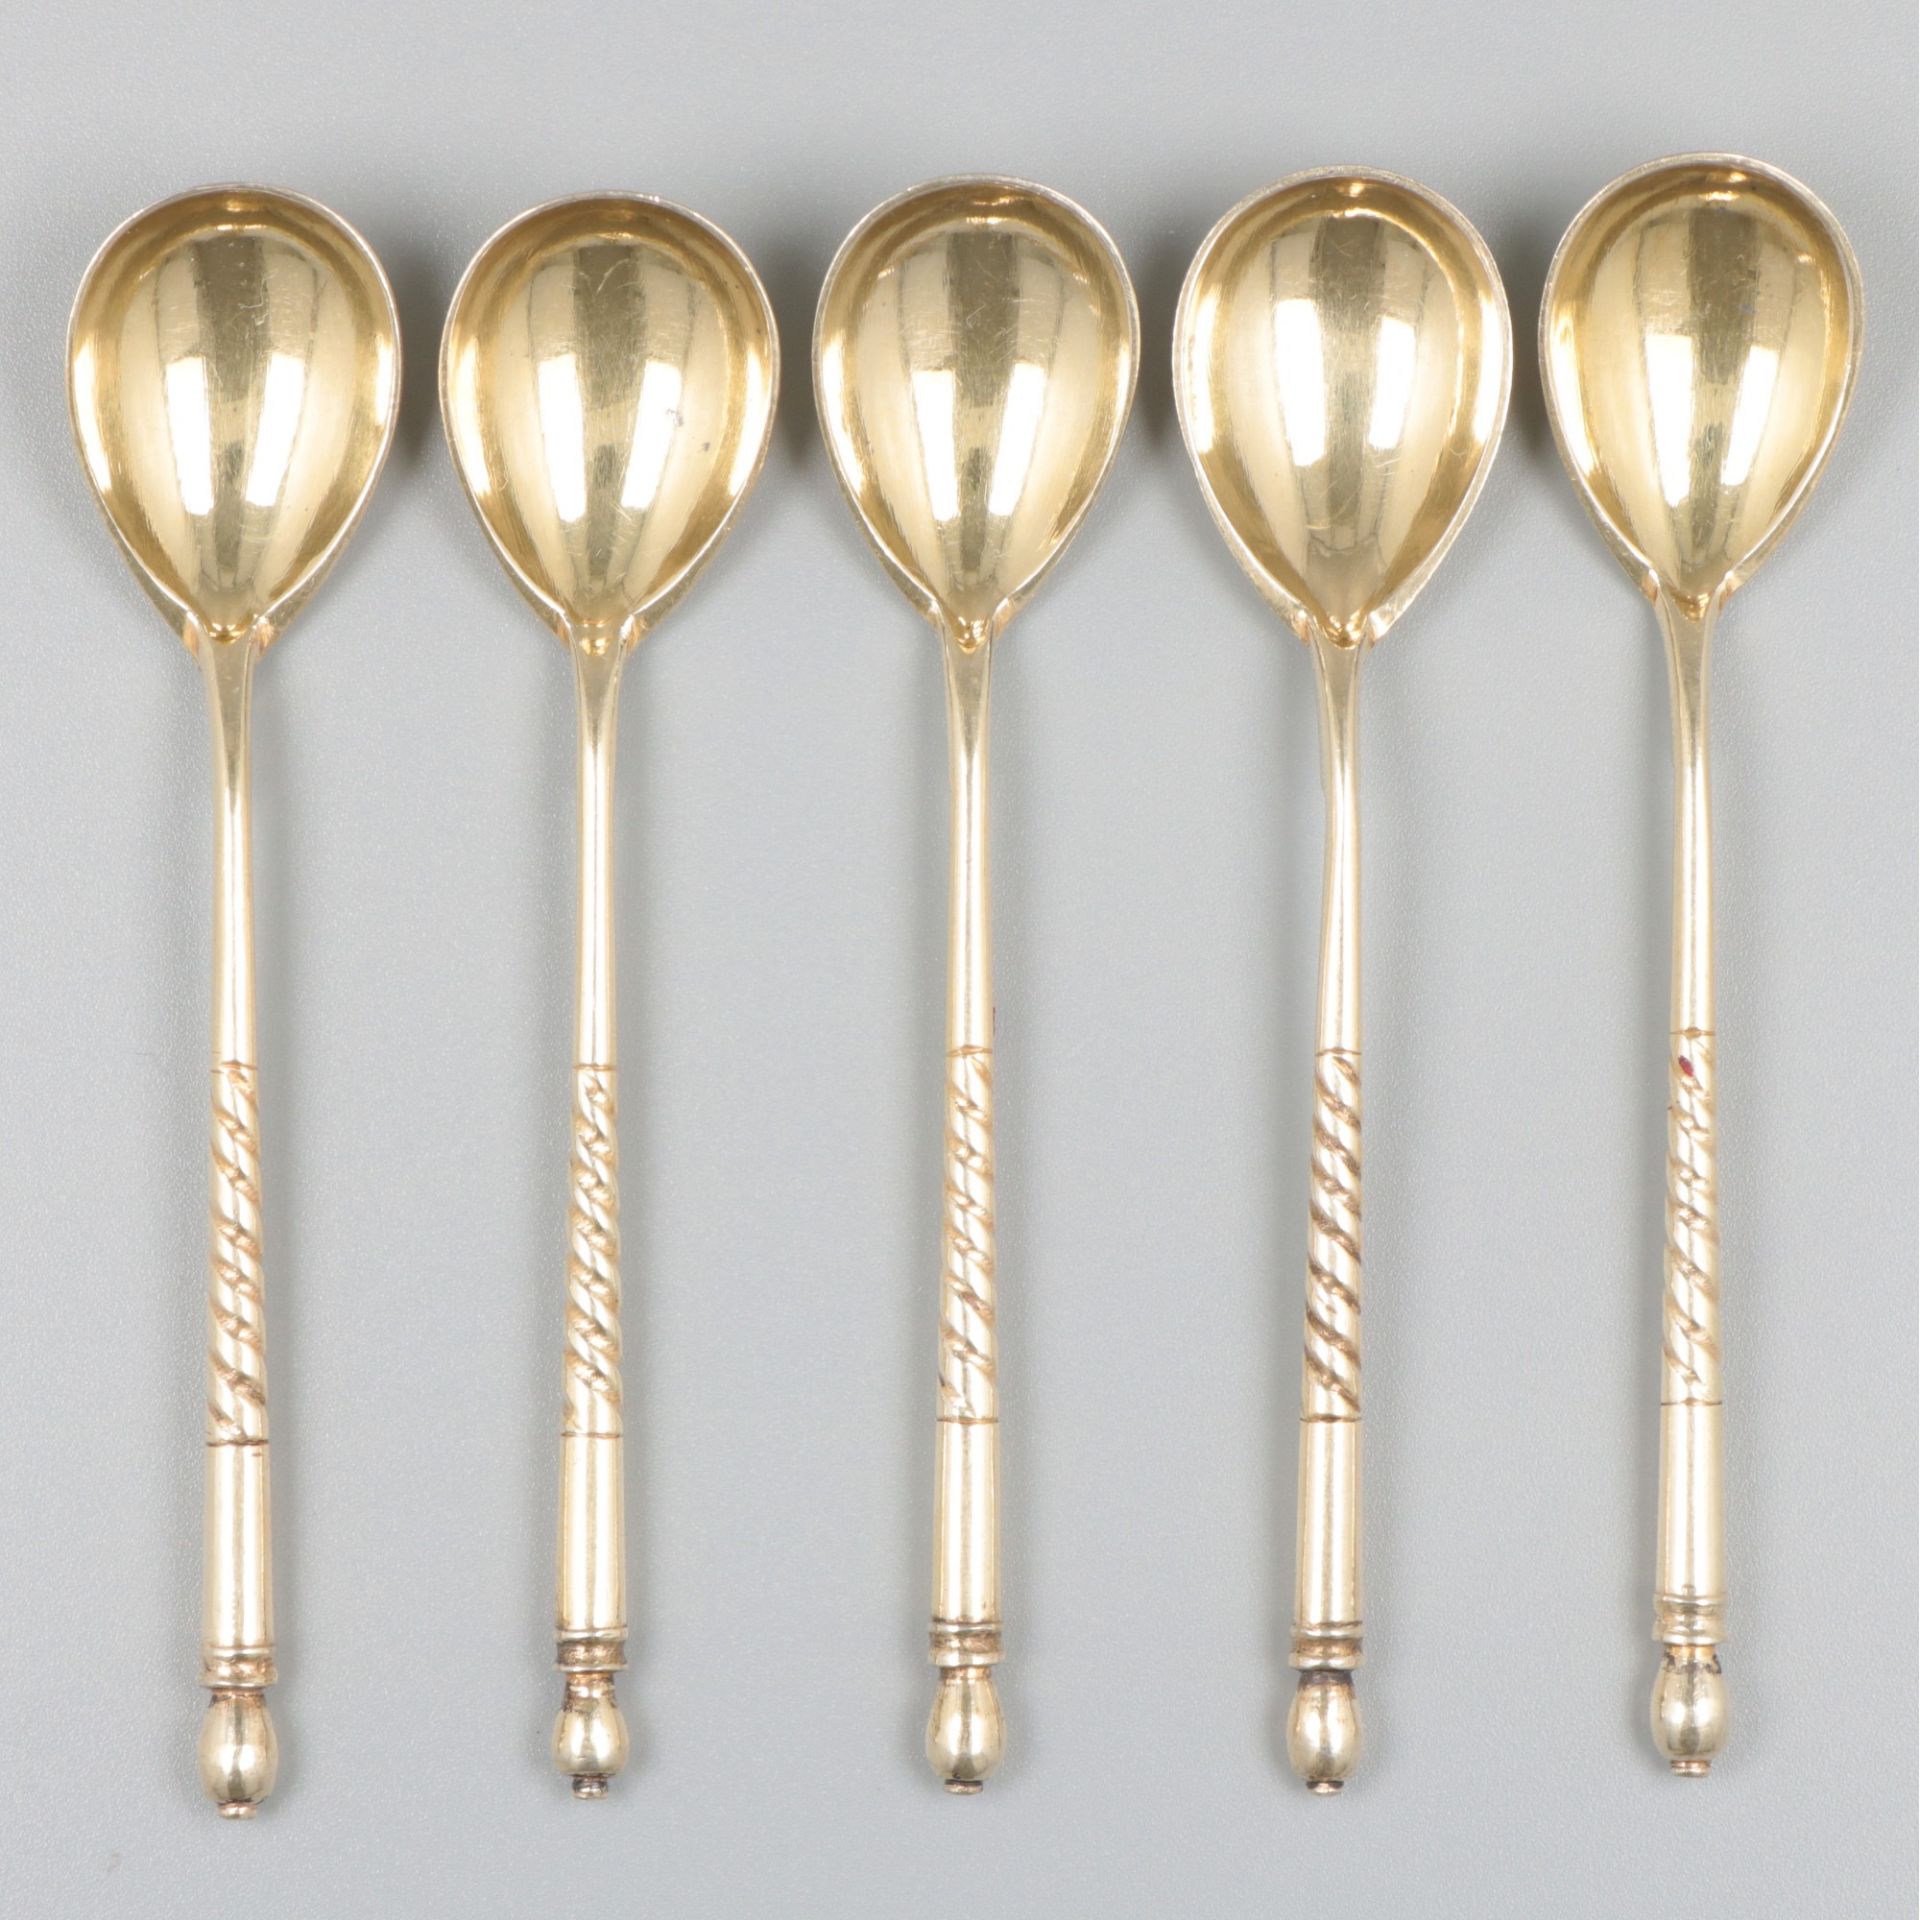 5-piece set of coffee spoons, silver.